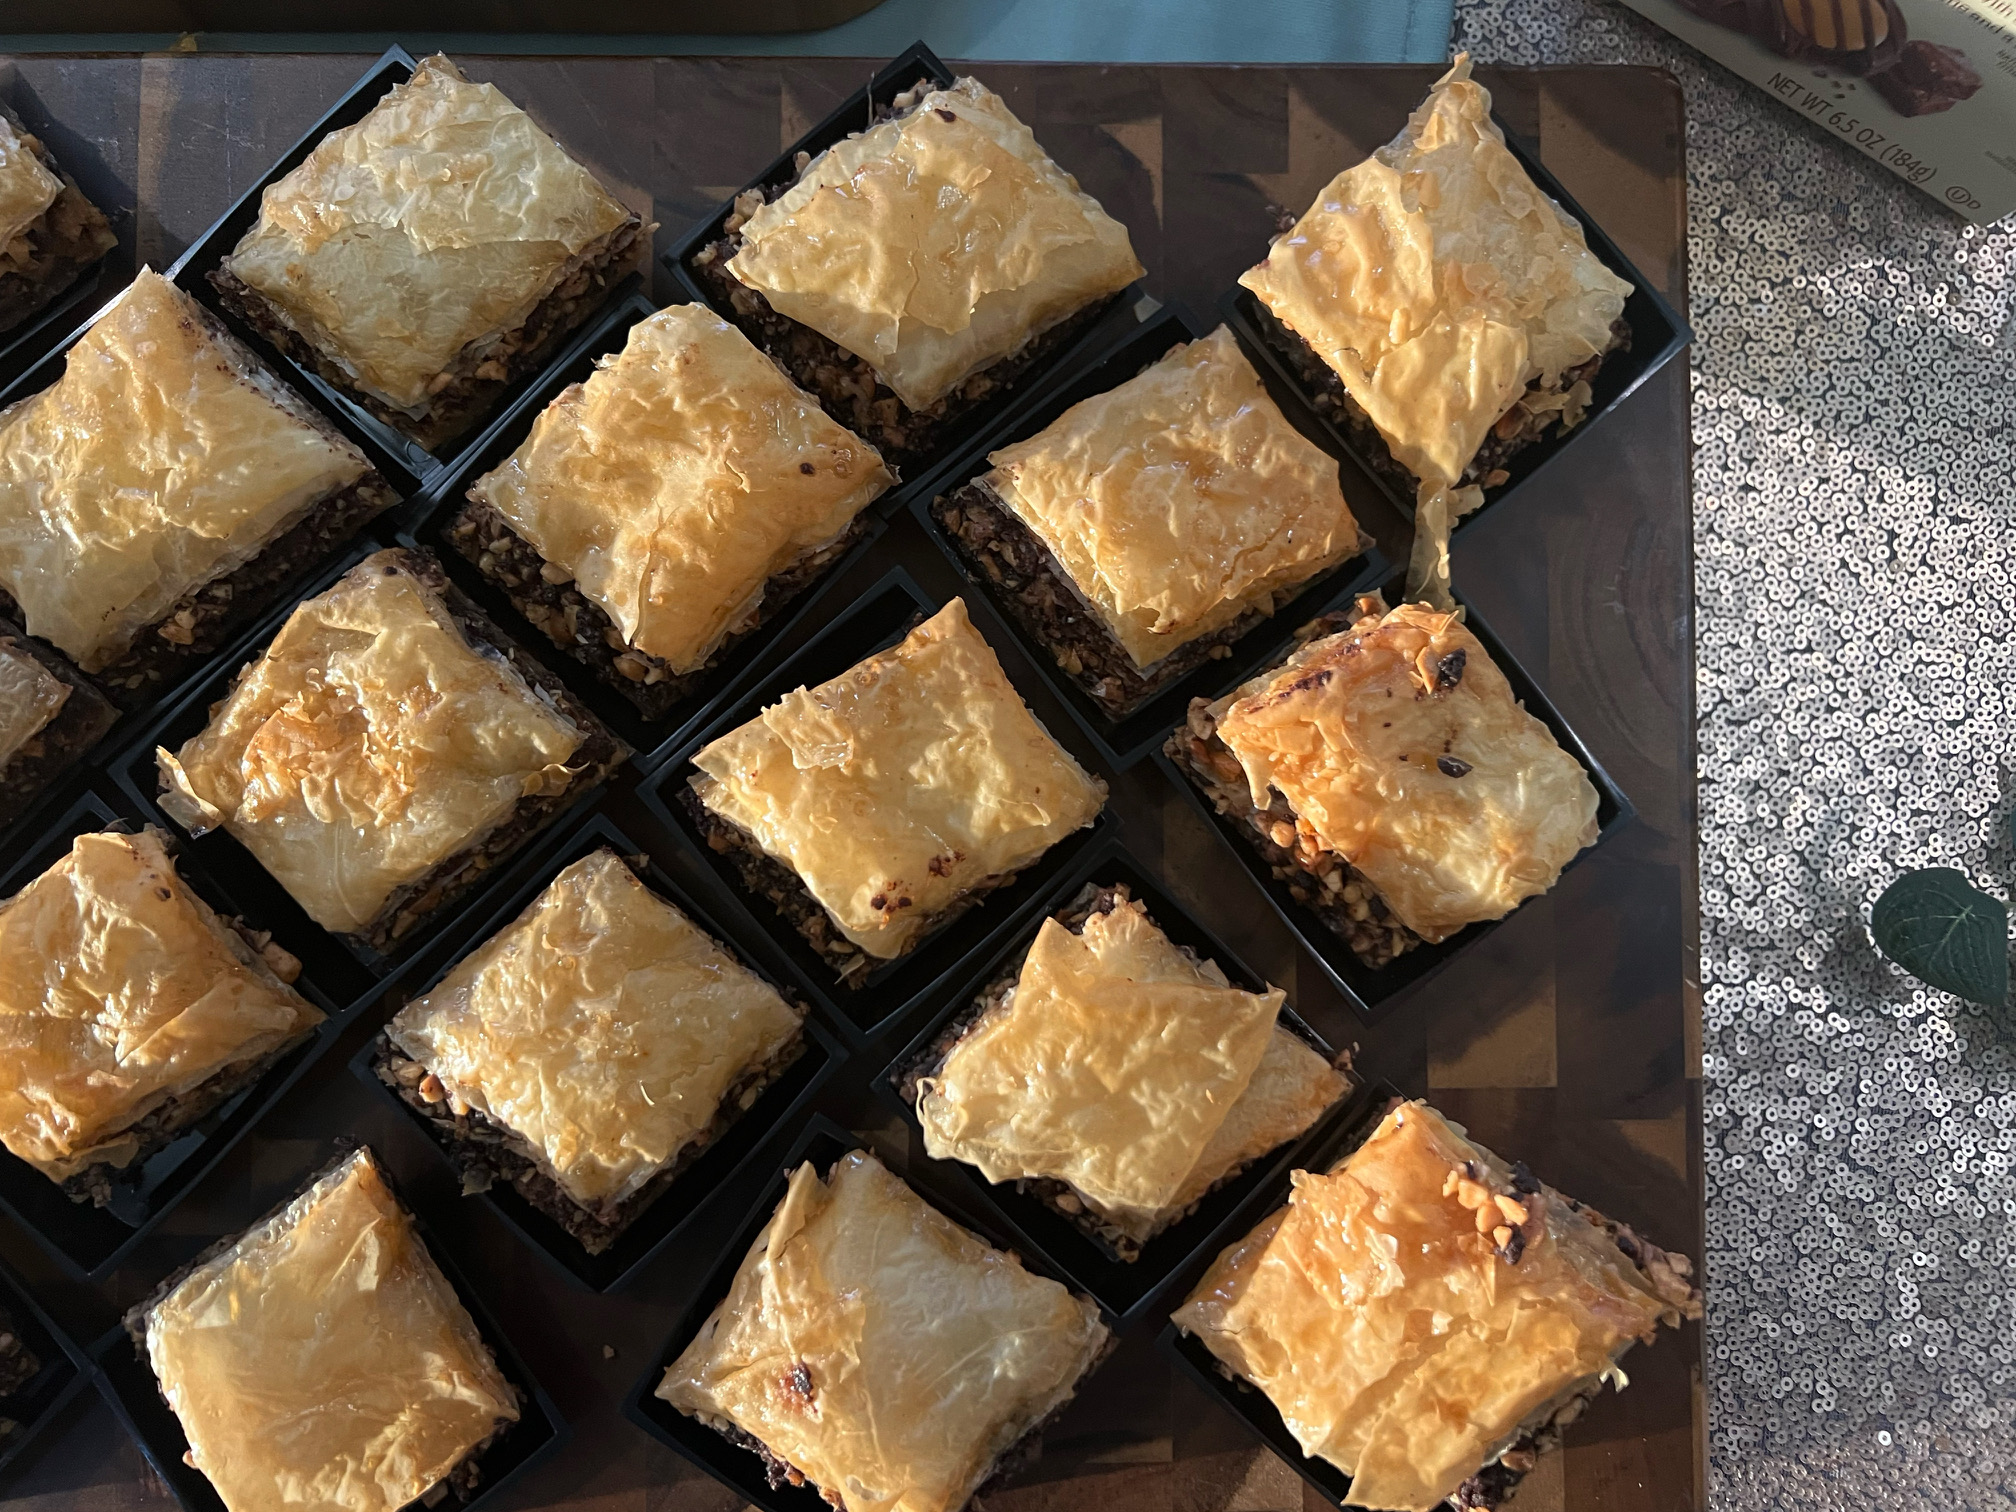 On a black tray, squares of baklava made by Lodgic's Everyday Kitchen are arranged for tasting. Photo by Alyssa Buckley.